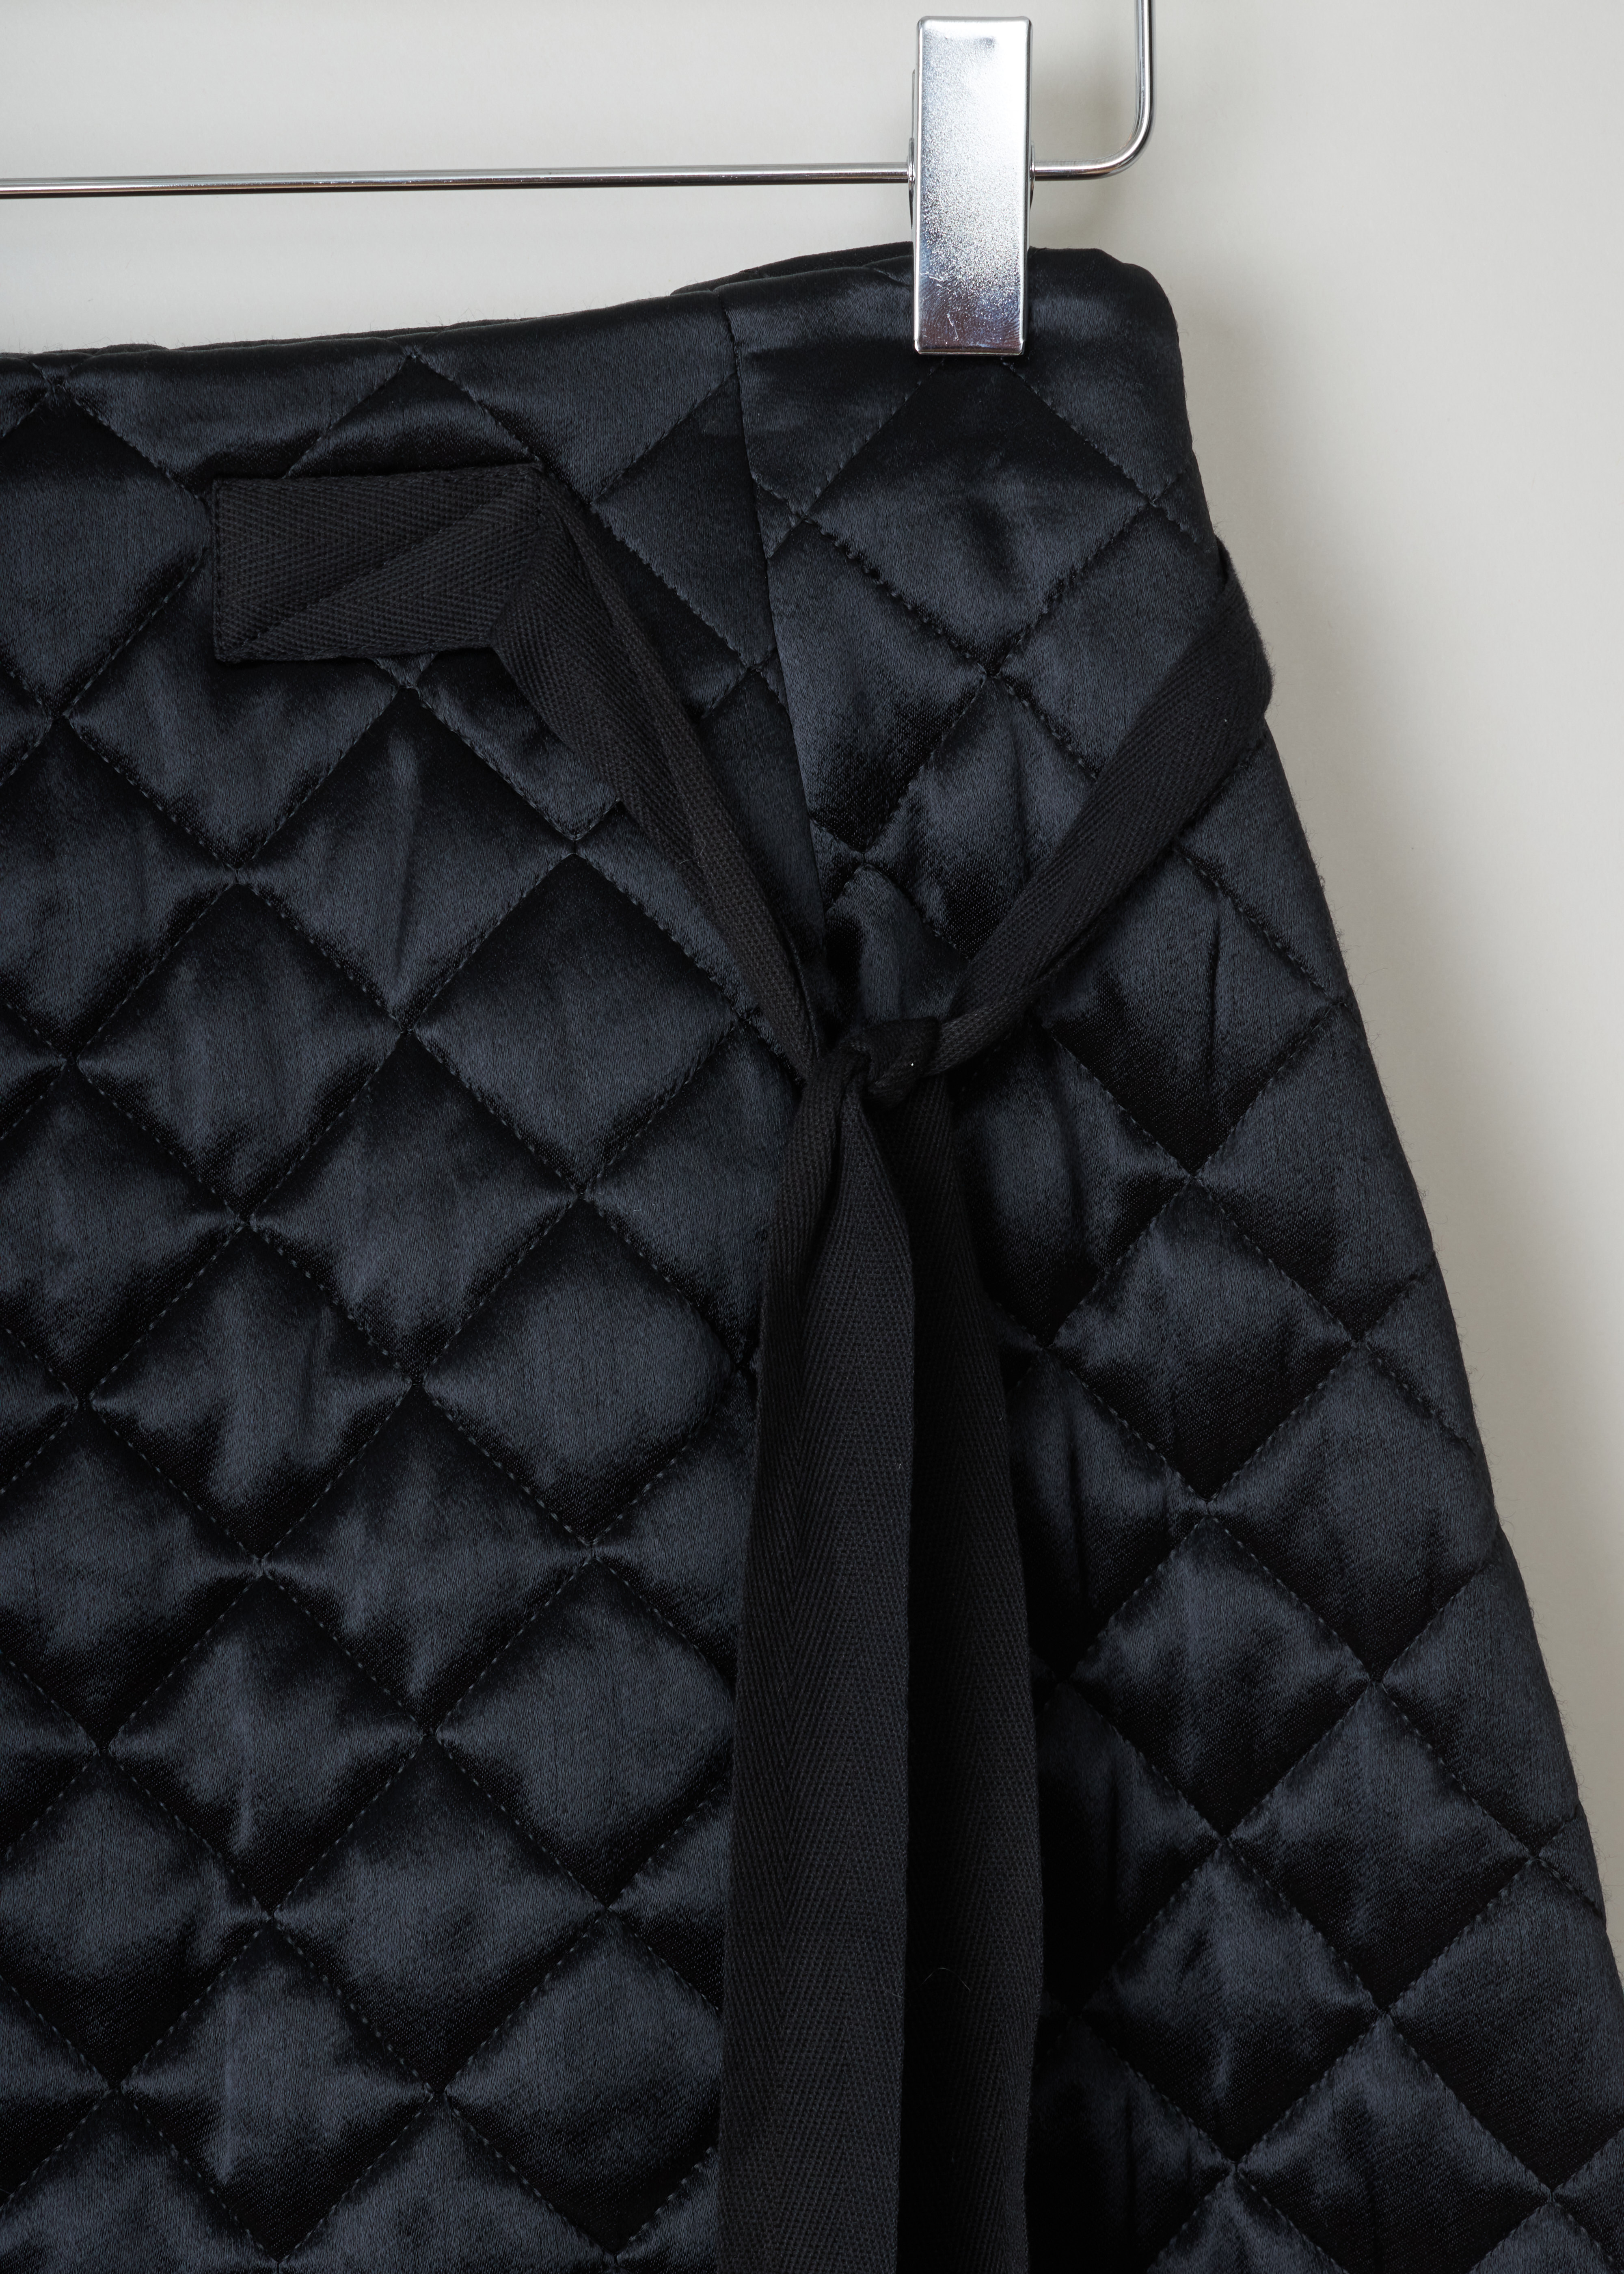 CÃ©line Quilted skirt 6563_22M90_0N0 black detail. Black quilted A-line skirt with bow detail and zip fastening on the side.